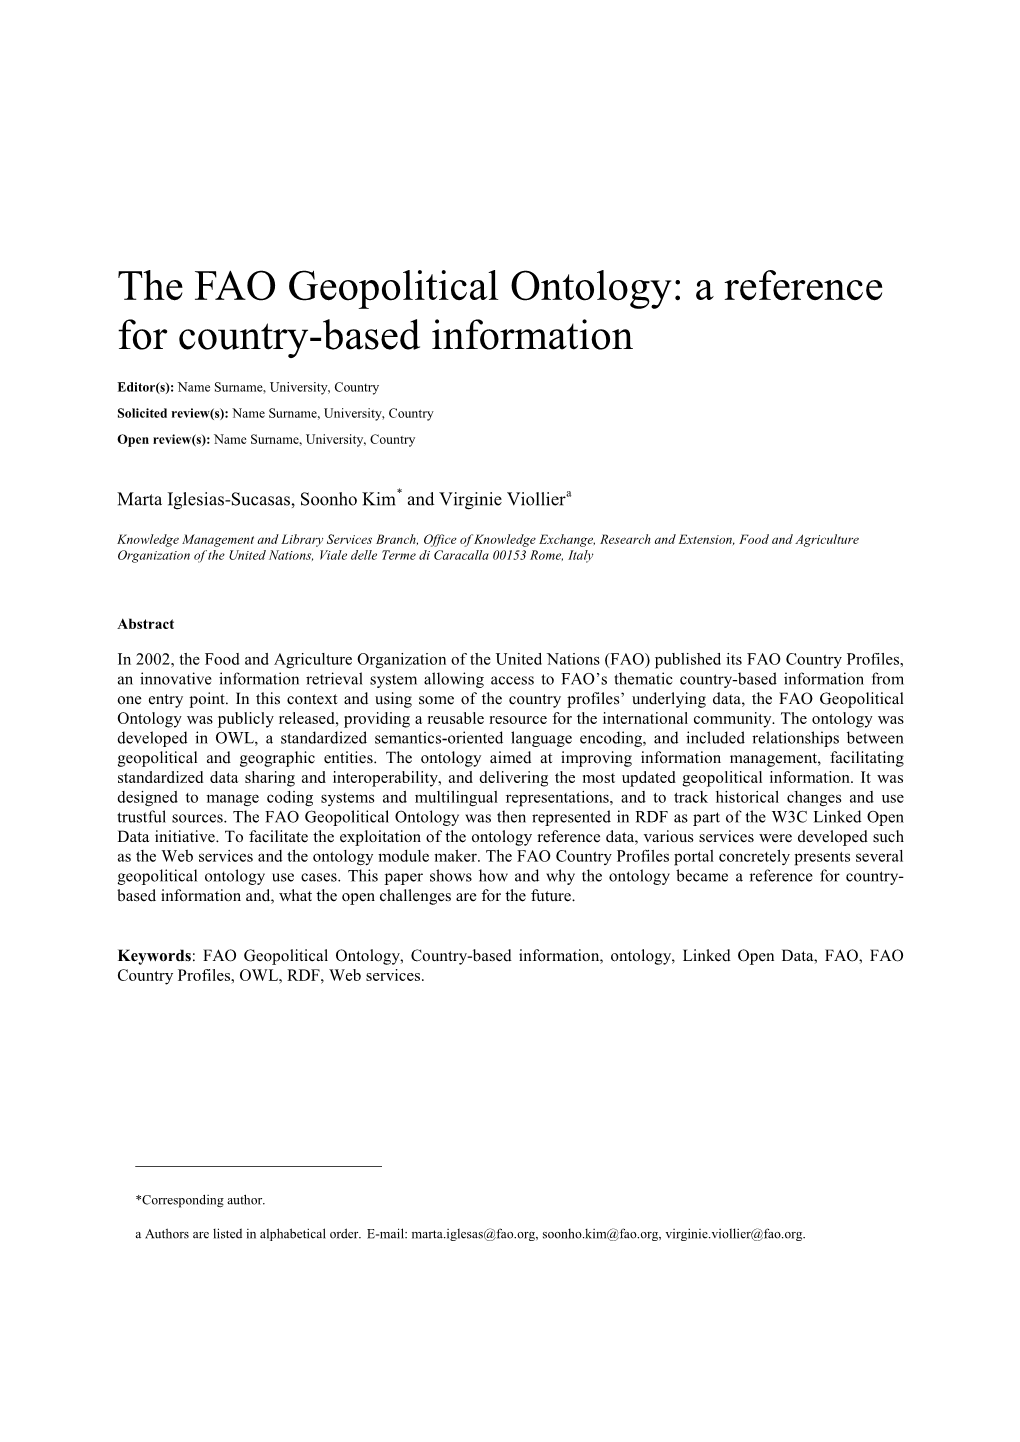 The FAO Geopolitical Ontology: a Reference for Country-Based Information